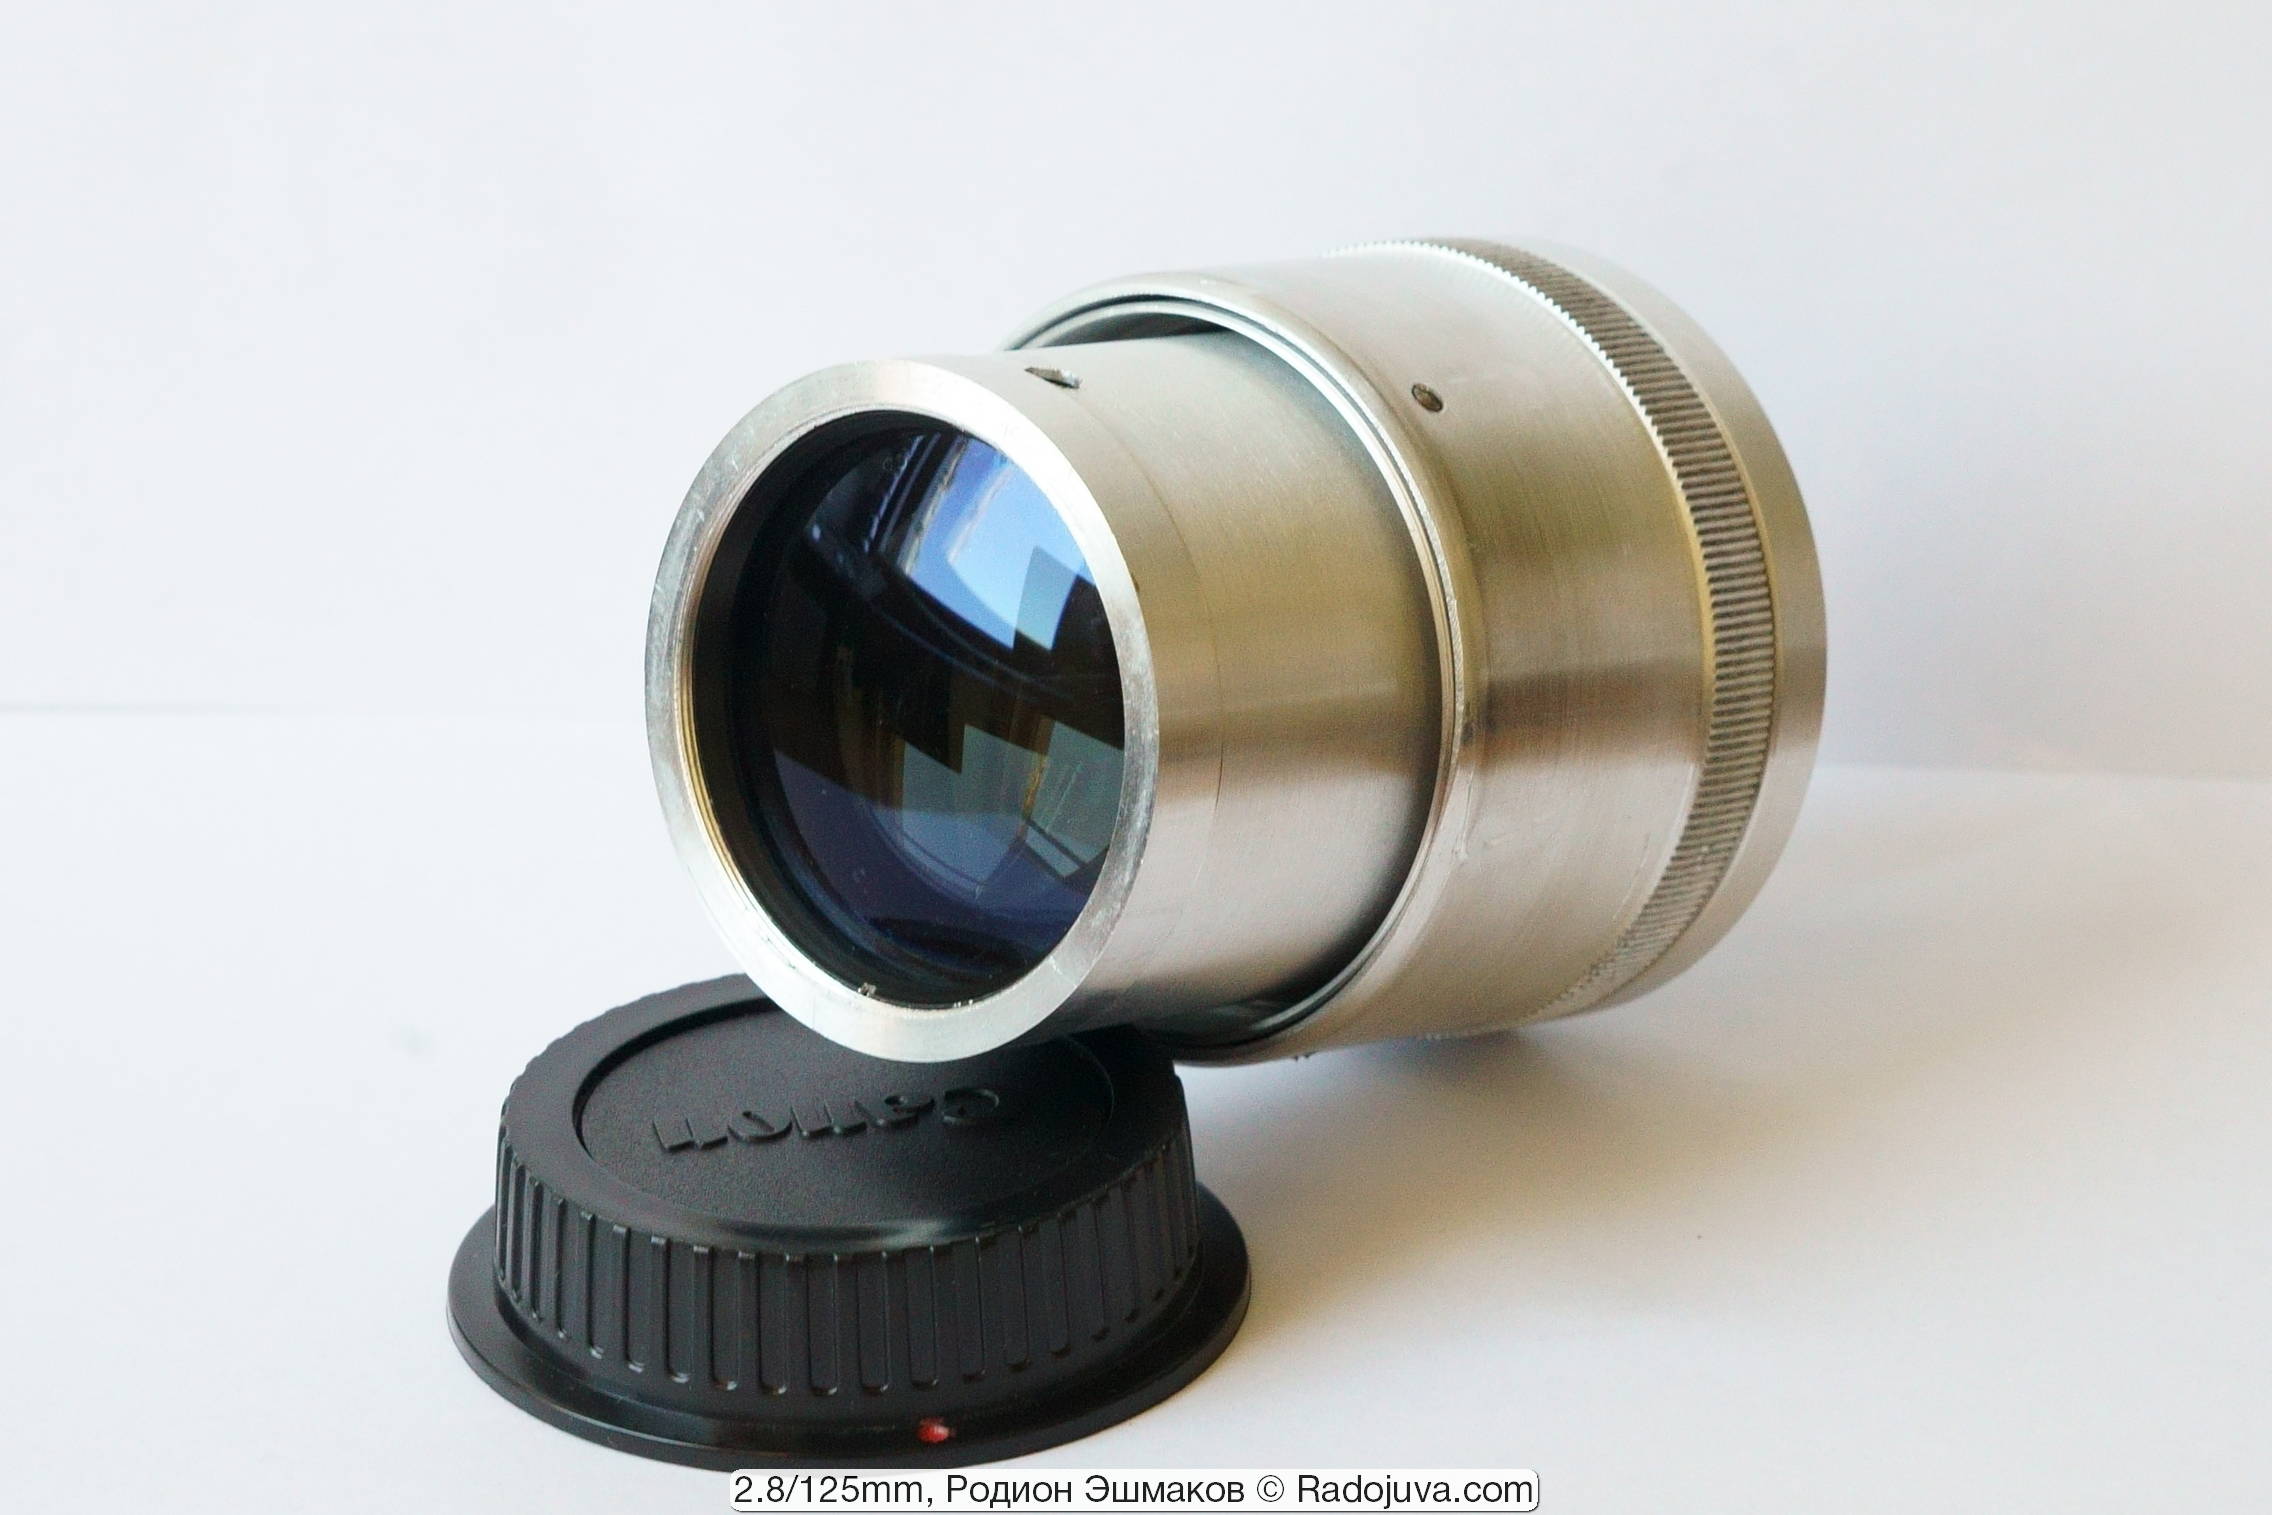 The lens received a new look during adaptation - the retaining ring and part of the body part remained from the old one.